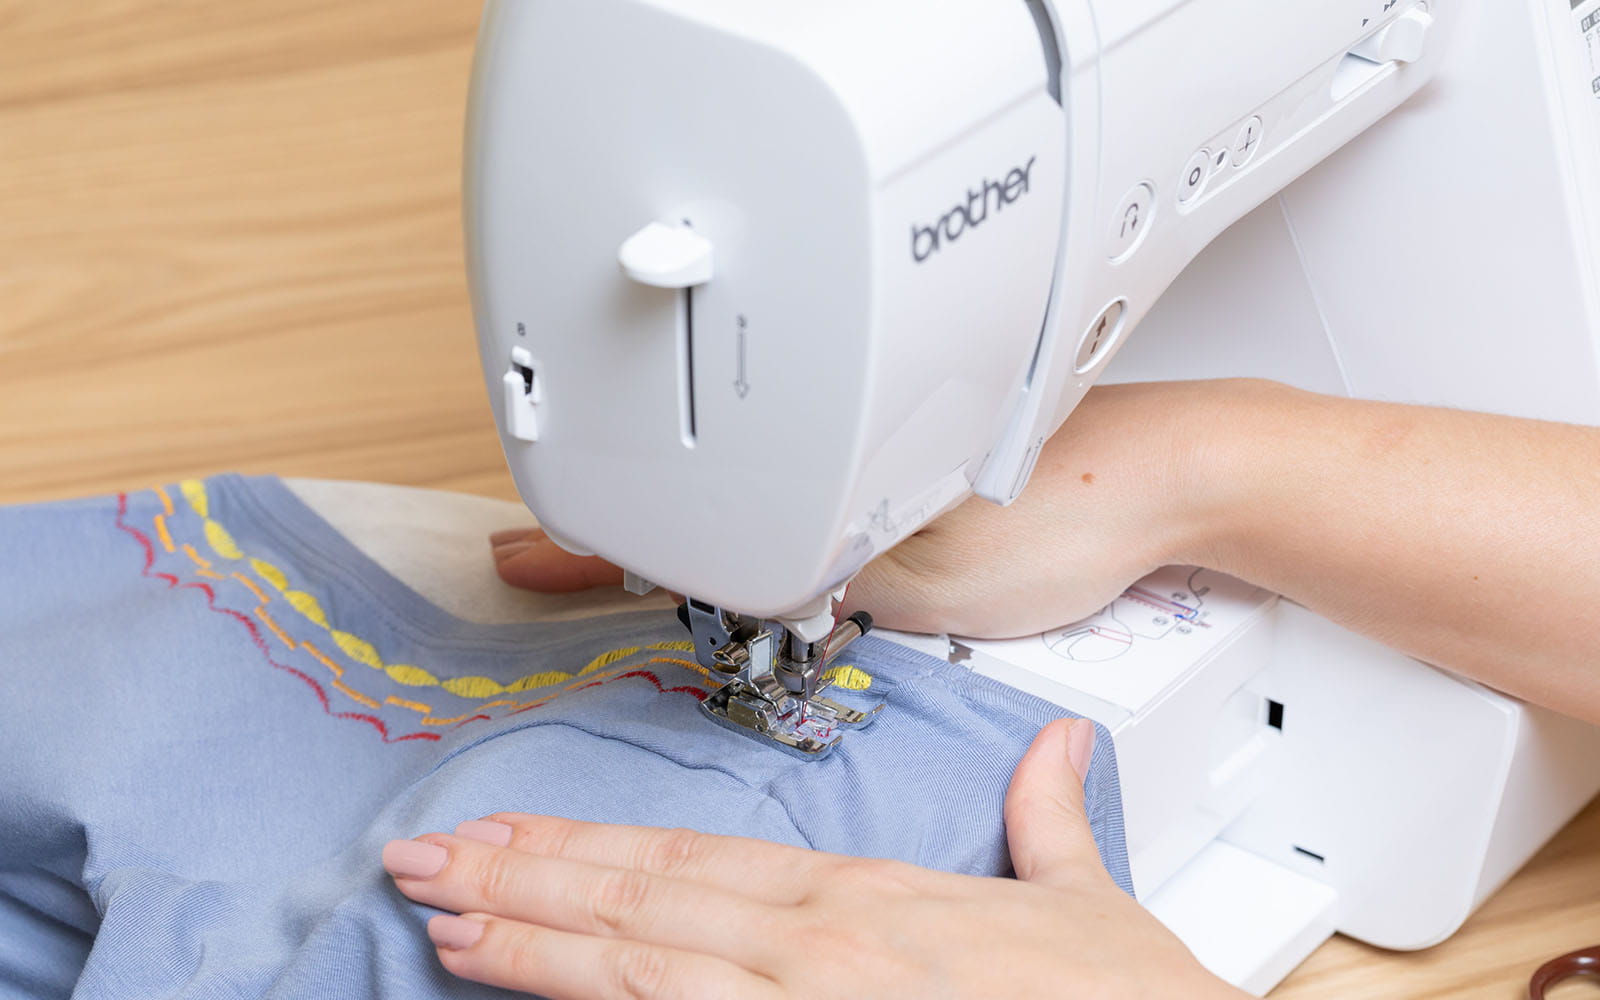 Hands sewing decorative stitching on neckline of blue T-shirt 